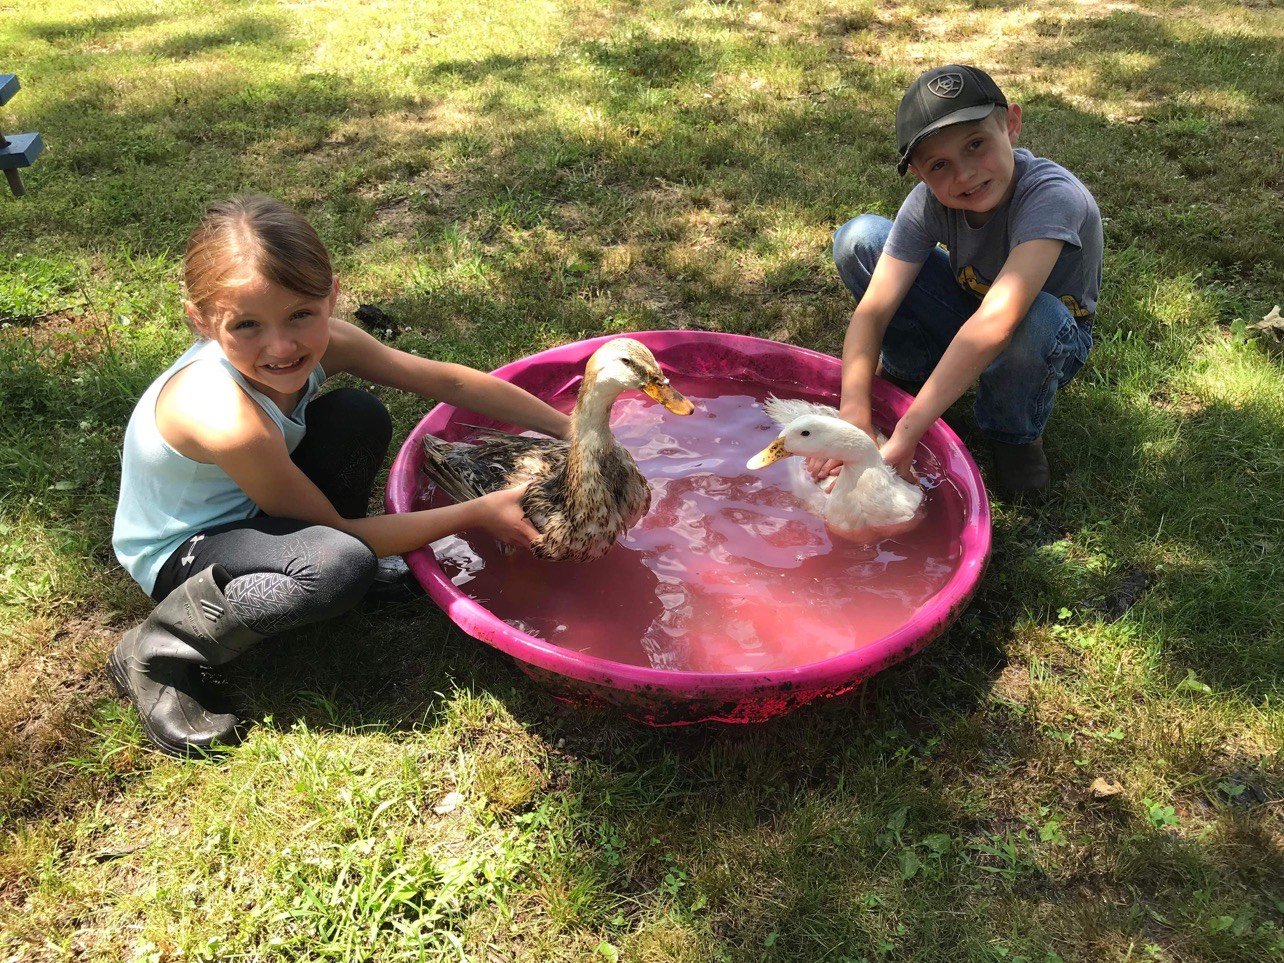 Evan and Katie Skidmore prep their ducks for the Webster County Fair with a nice bath.